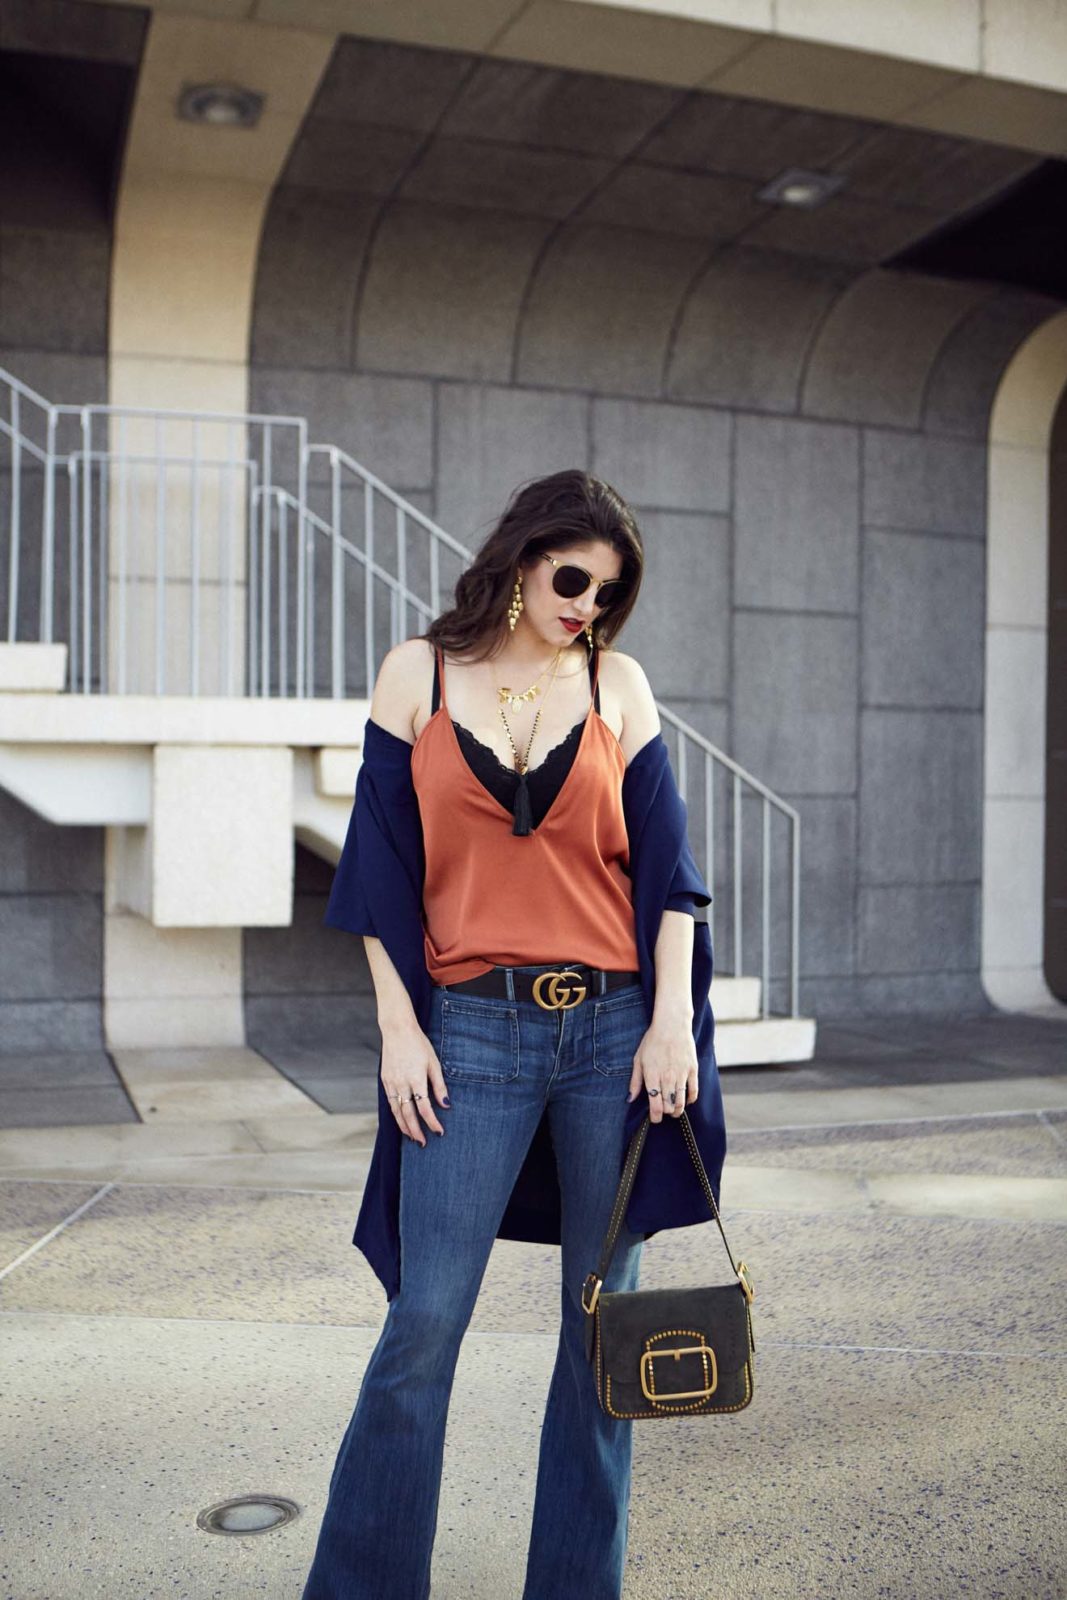 My Favorite Outfits of All Time by popular Los Angeles style blogger Laura Lily